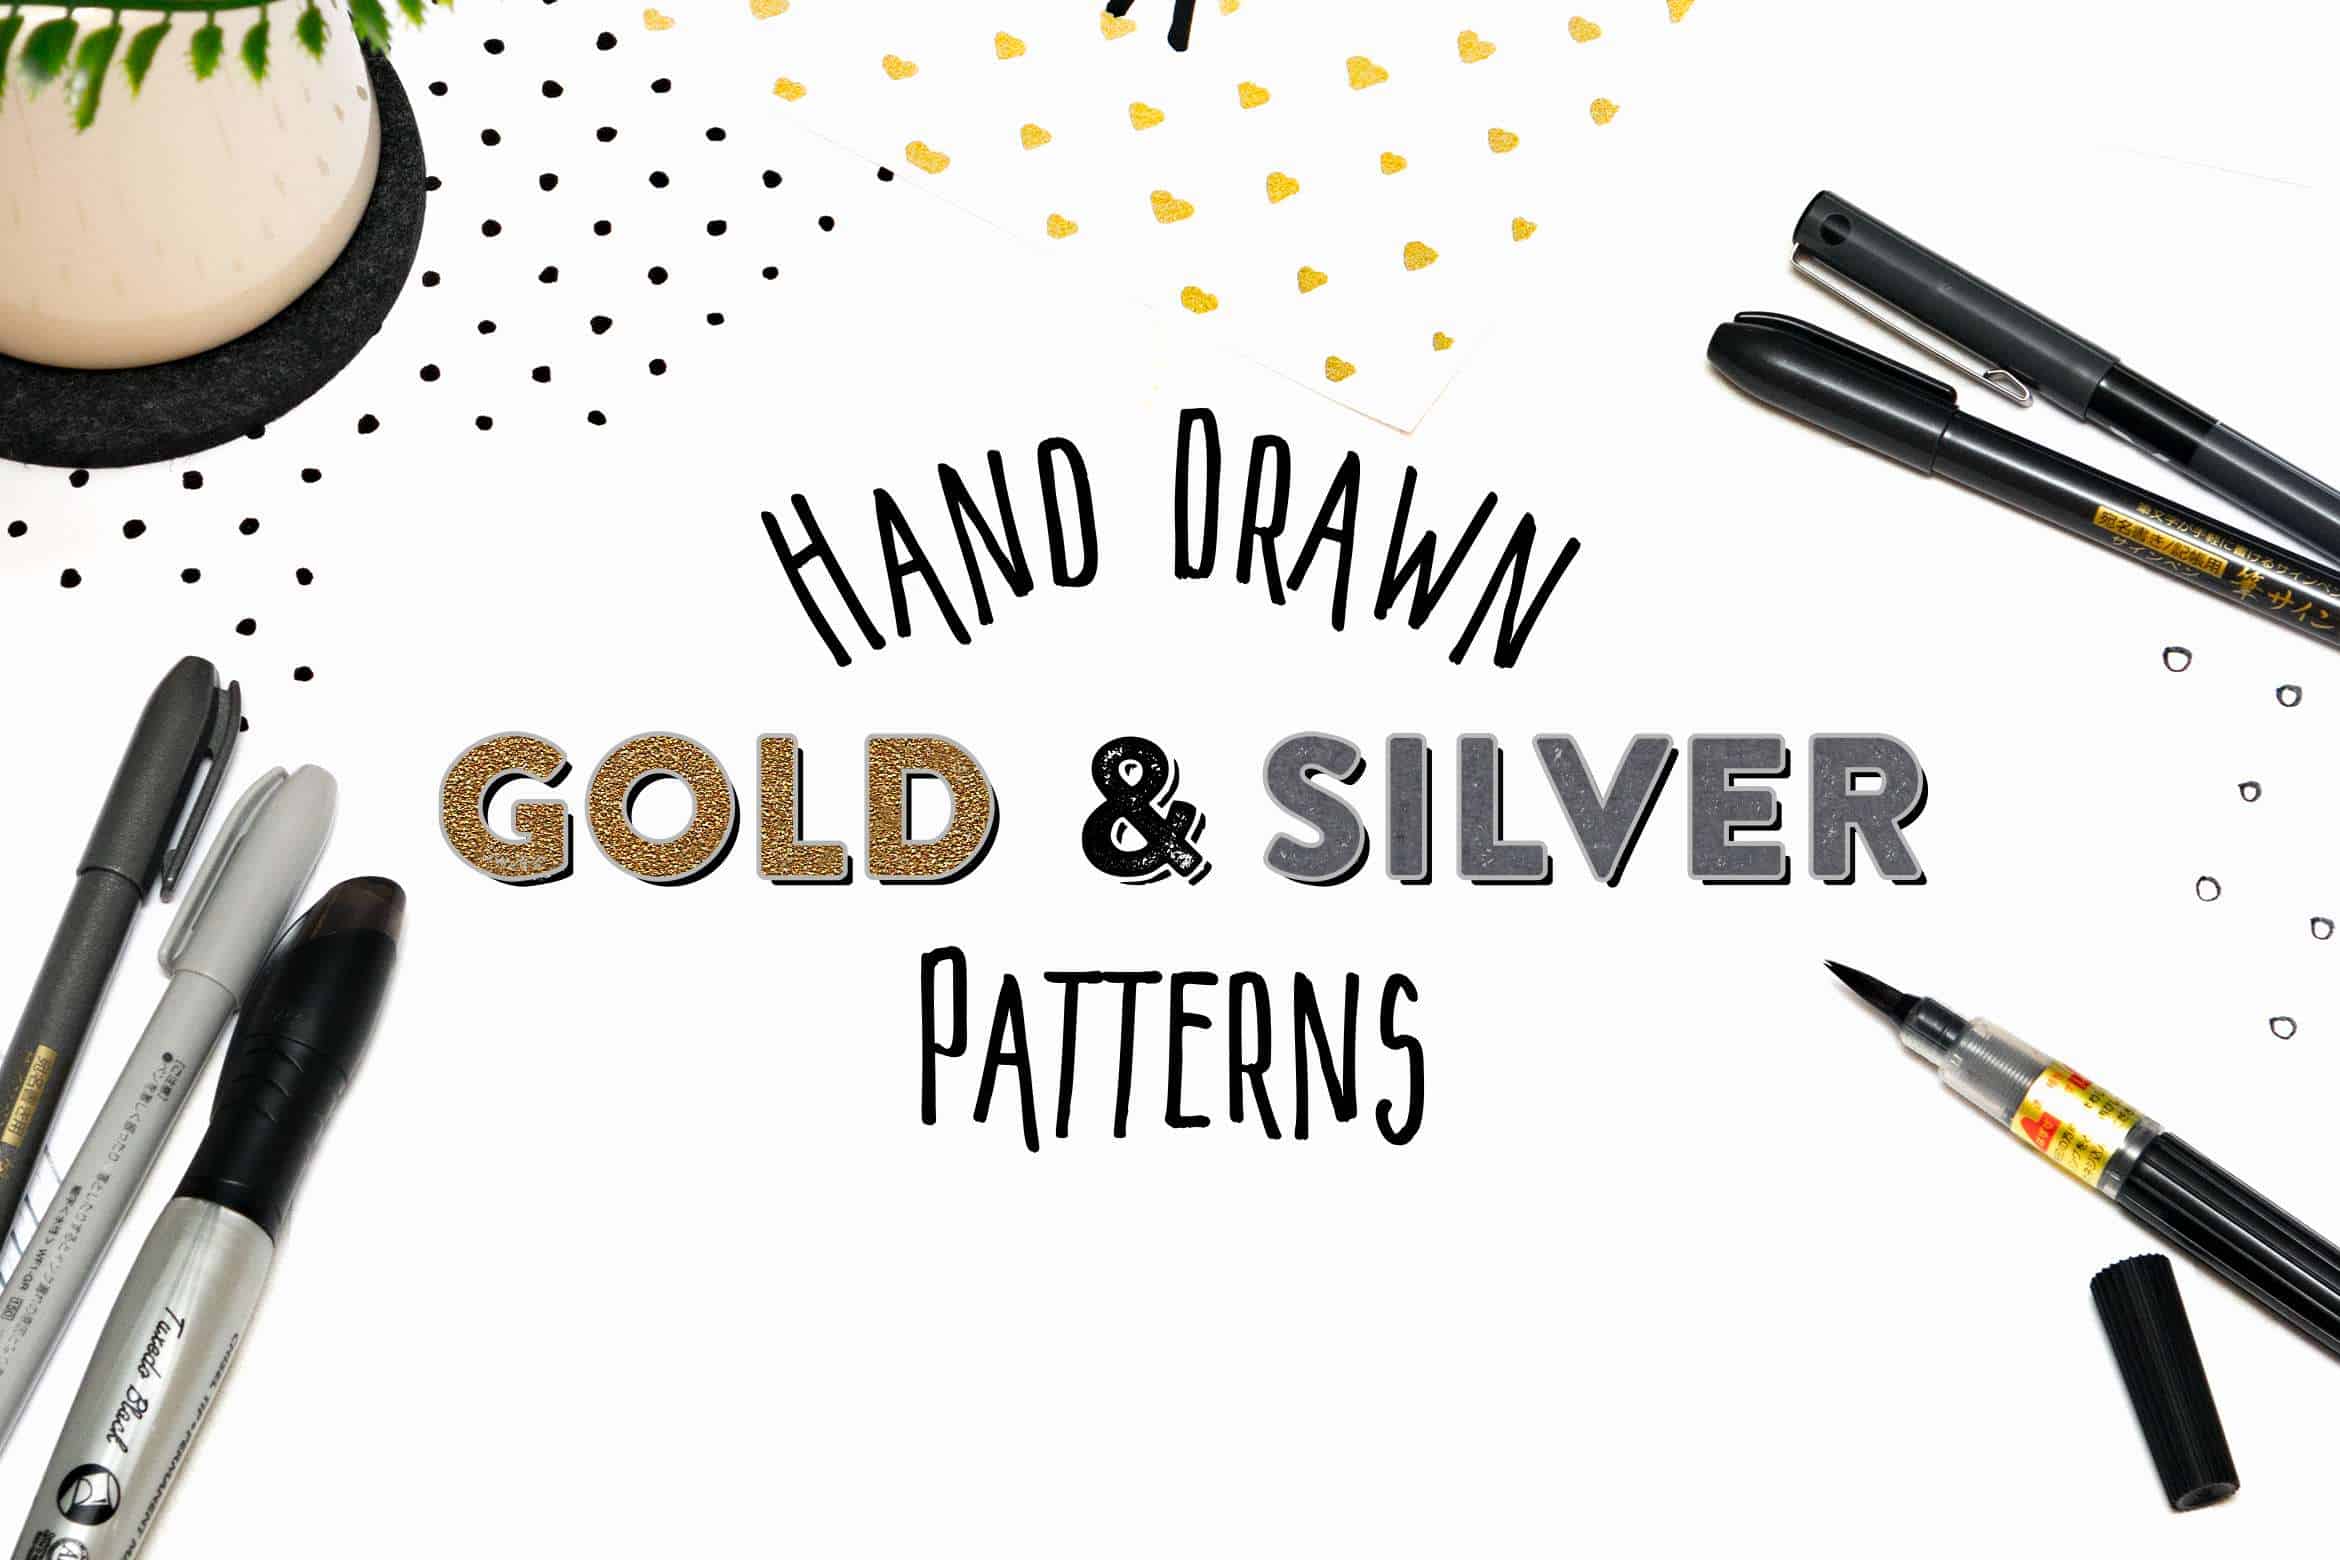 15 Hand Drawn Gold & Silver Patterns